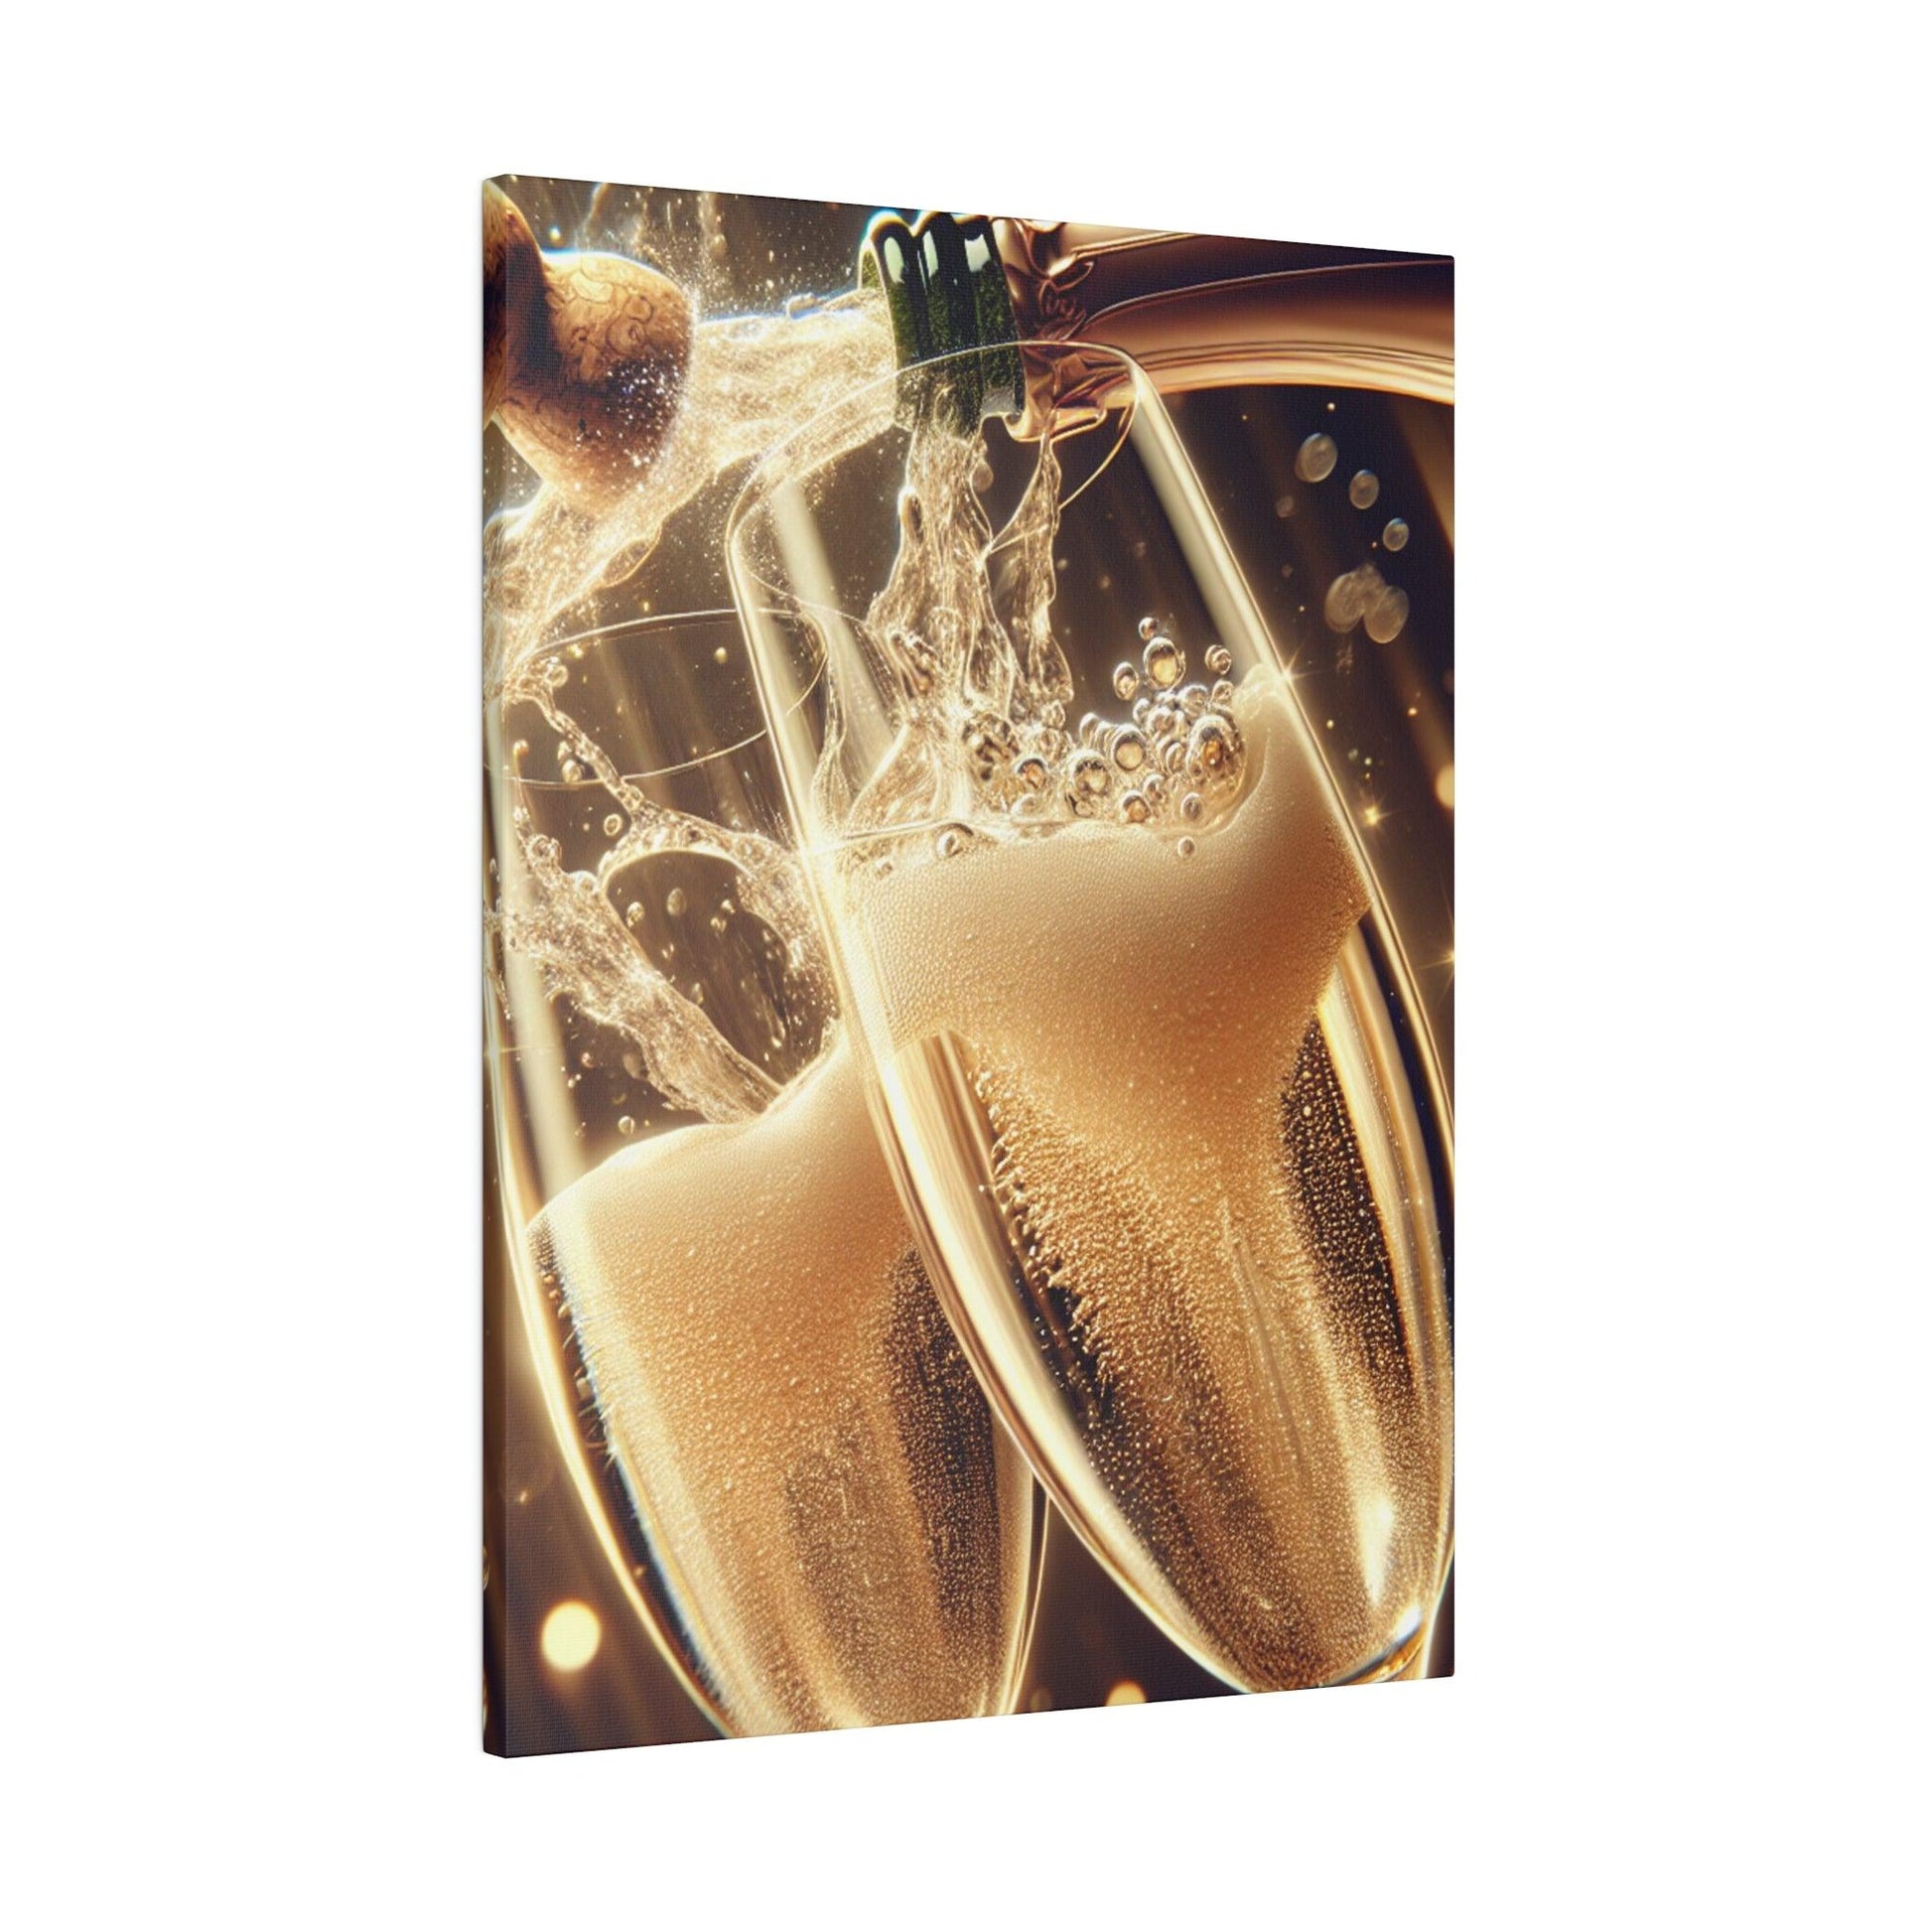 "Champagne Reverie: A Symphony of Bubbly Elation" - The Alice Gallery